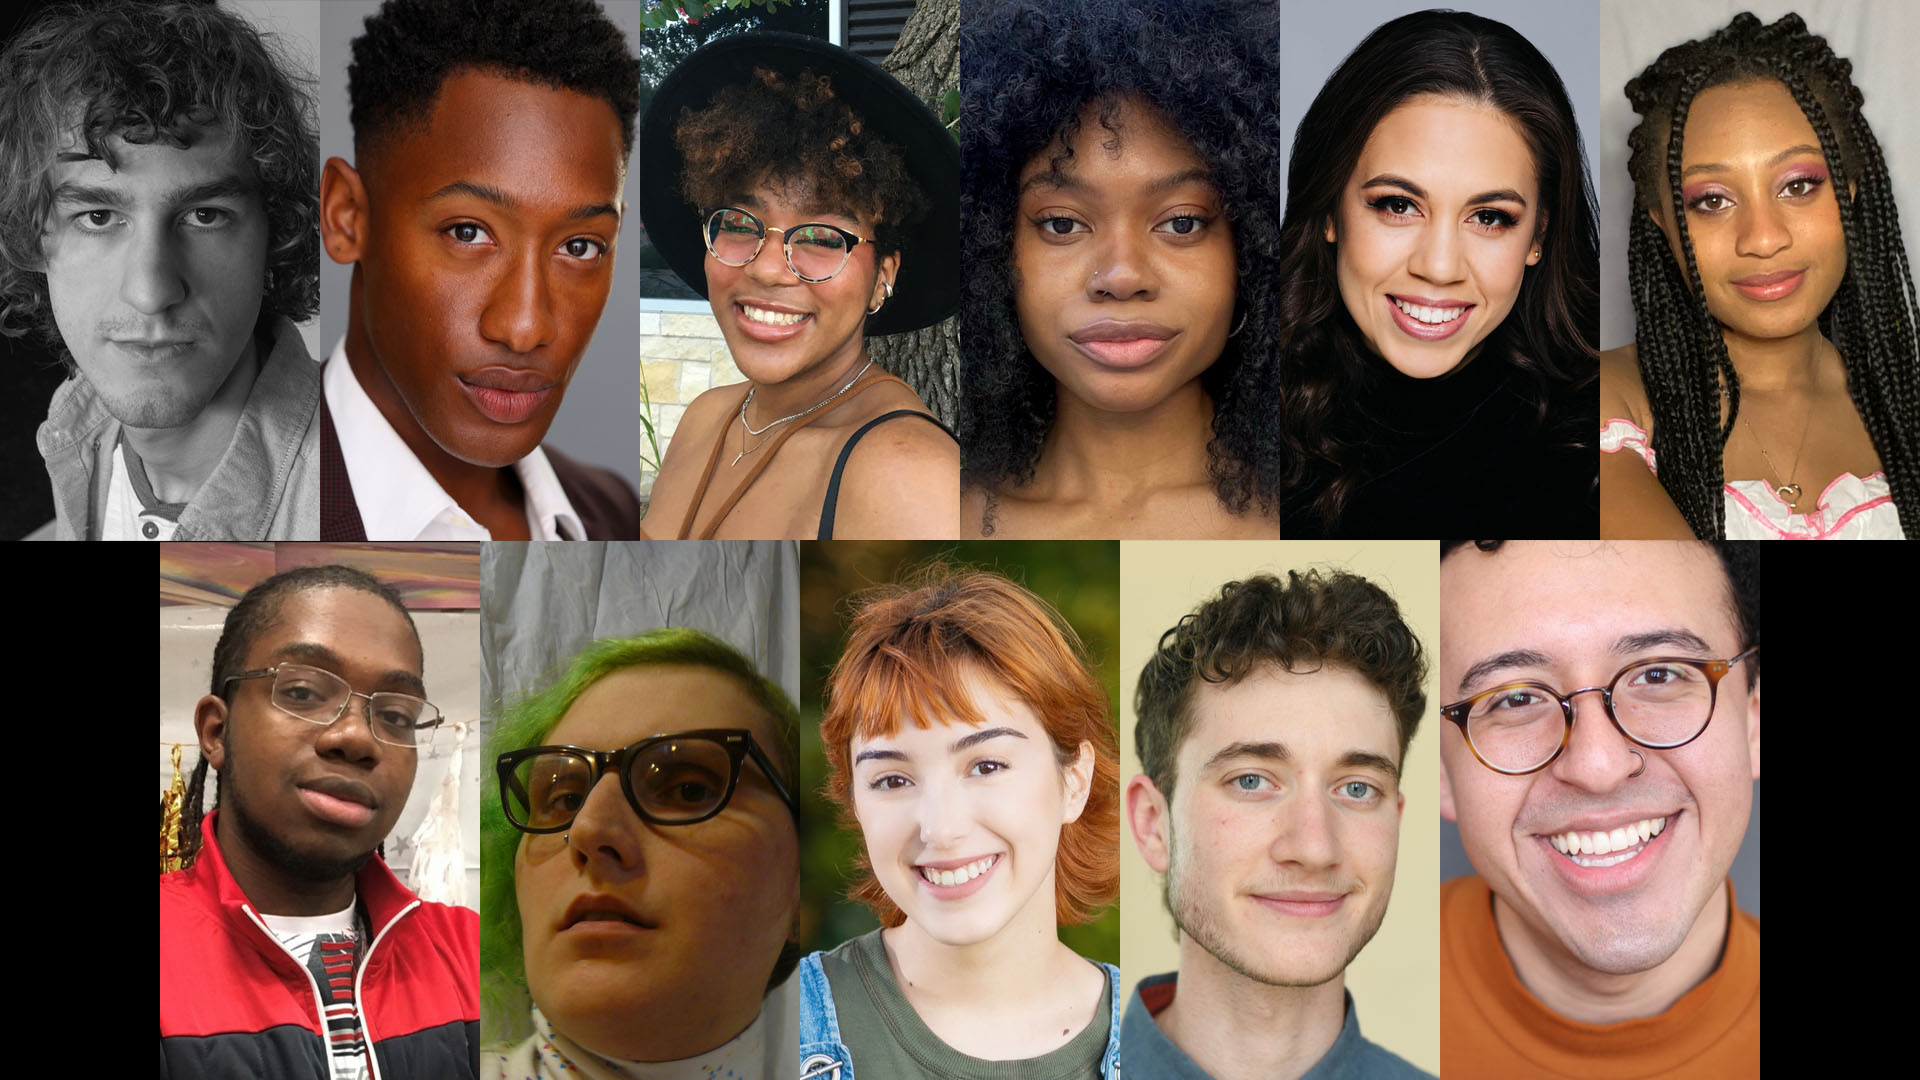 Read about the cast and creative teams working on this year's UTNT (UT New Theatre) showcase